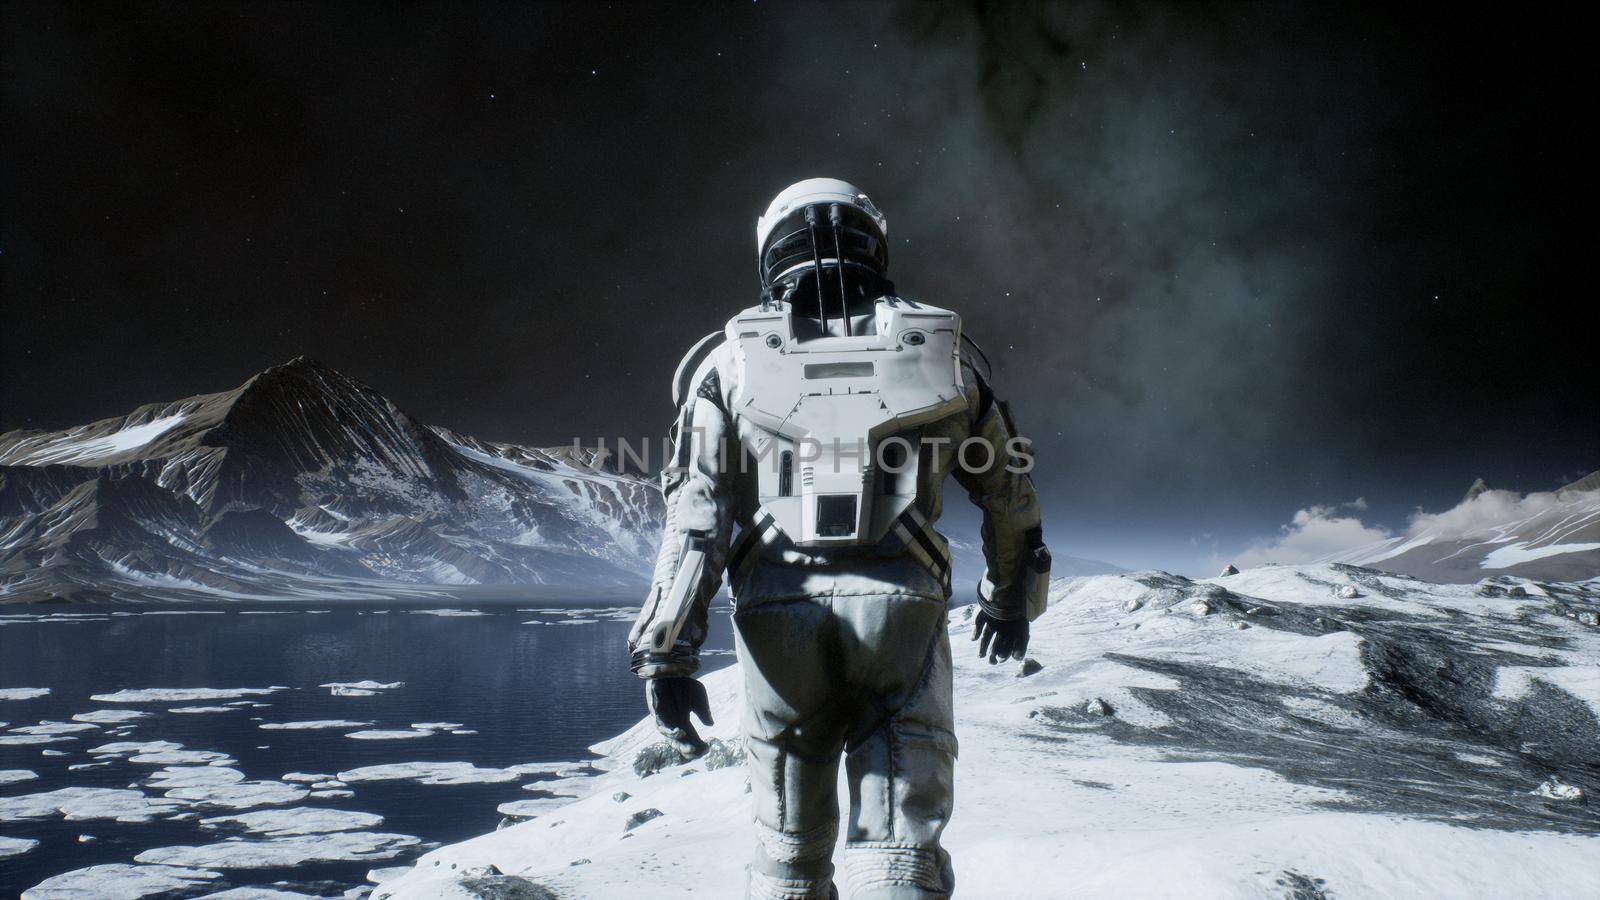 The astronaut is walking on a new unknown snow planet under alien constellations and nebulae. 3D Rendering by designprojects